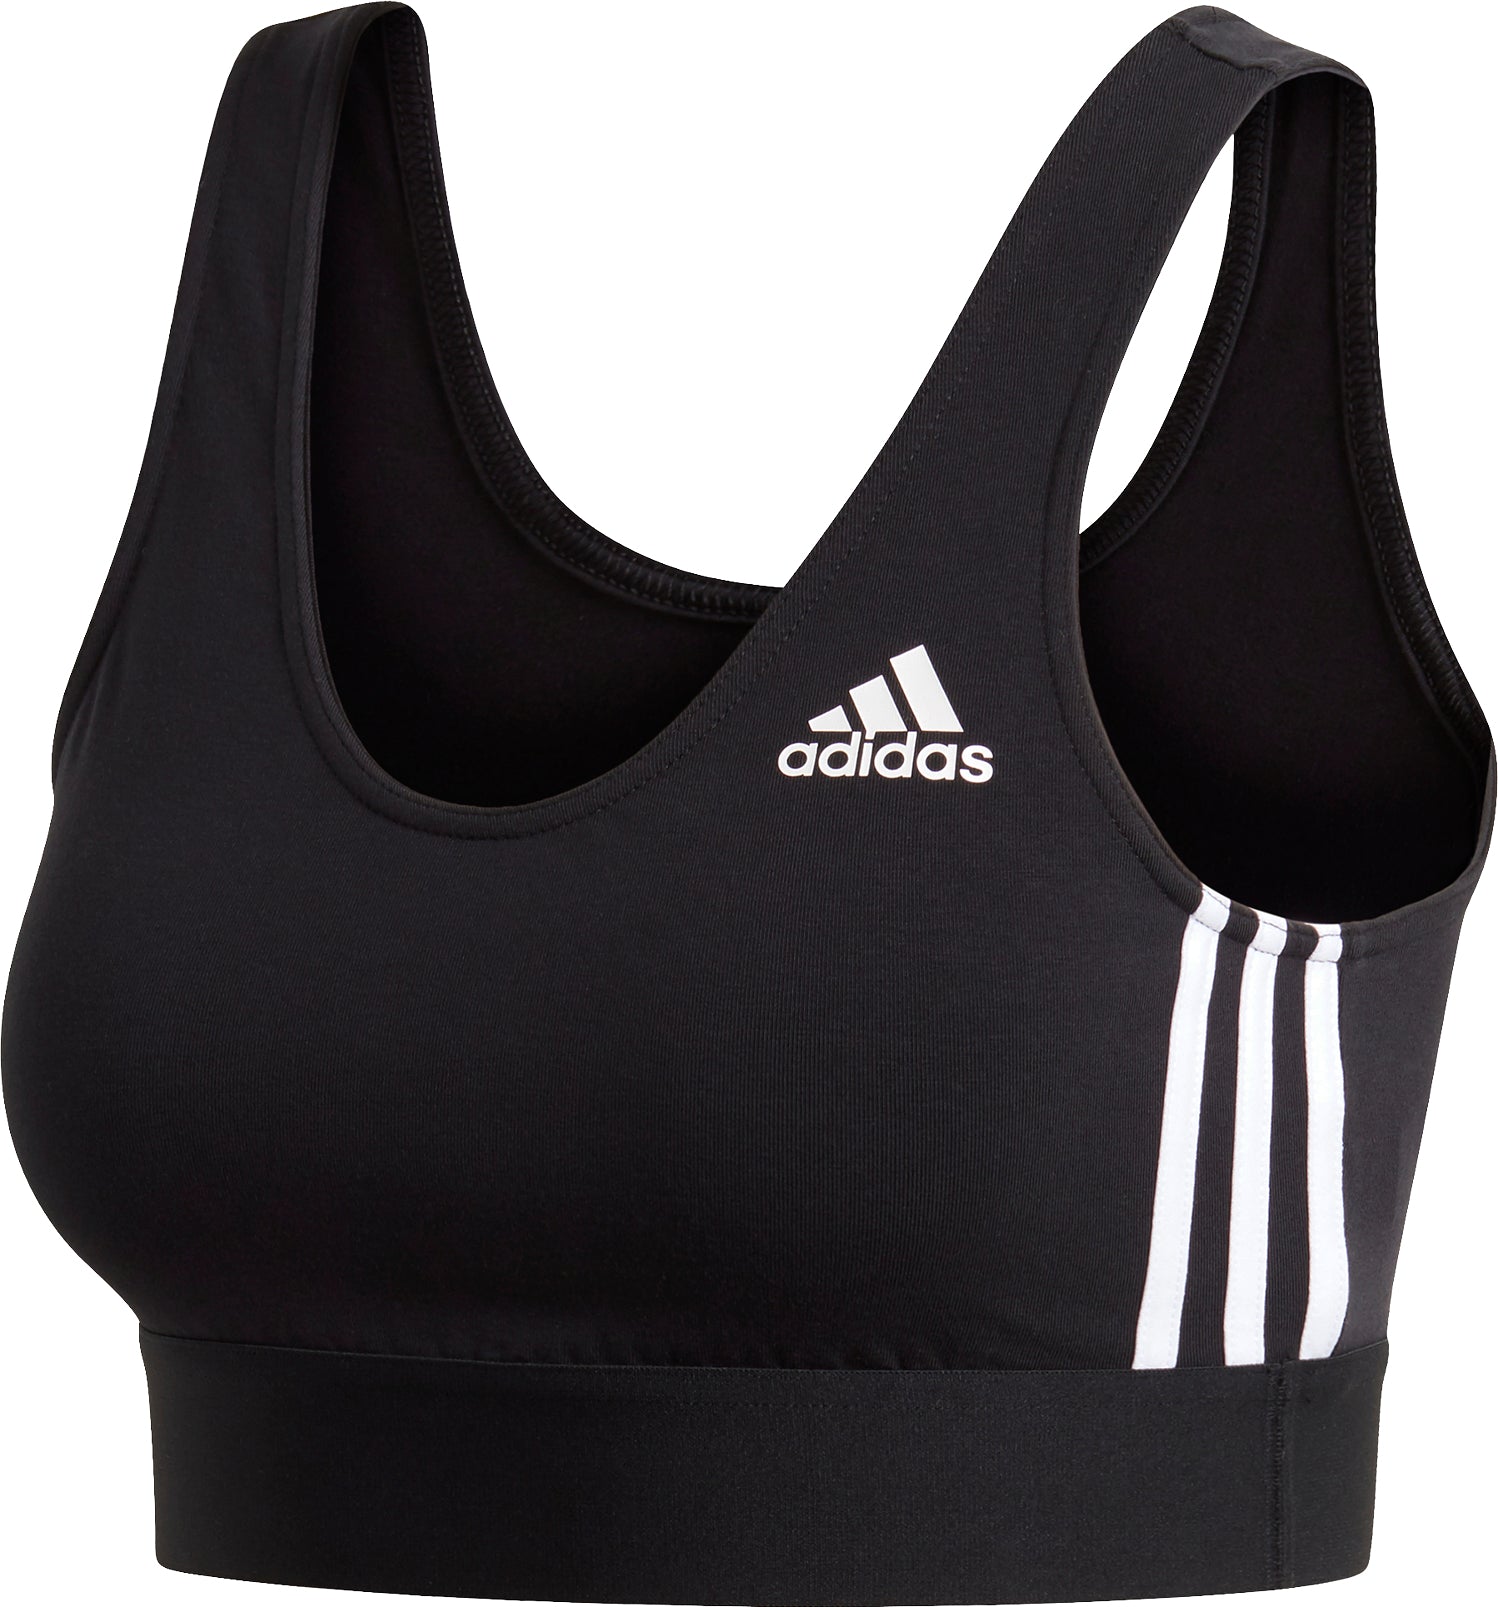 Adidas Must Haves 3-Stripes Bra Top - Women's | The Last Hunt